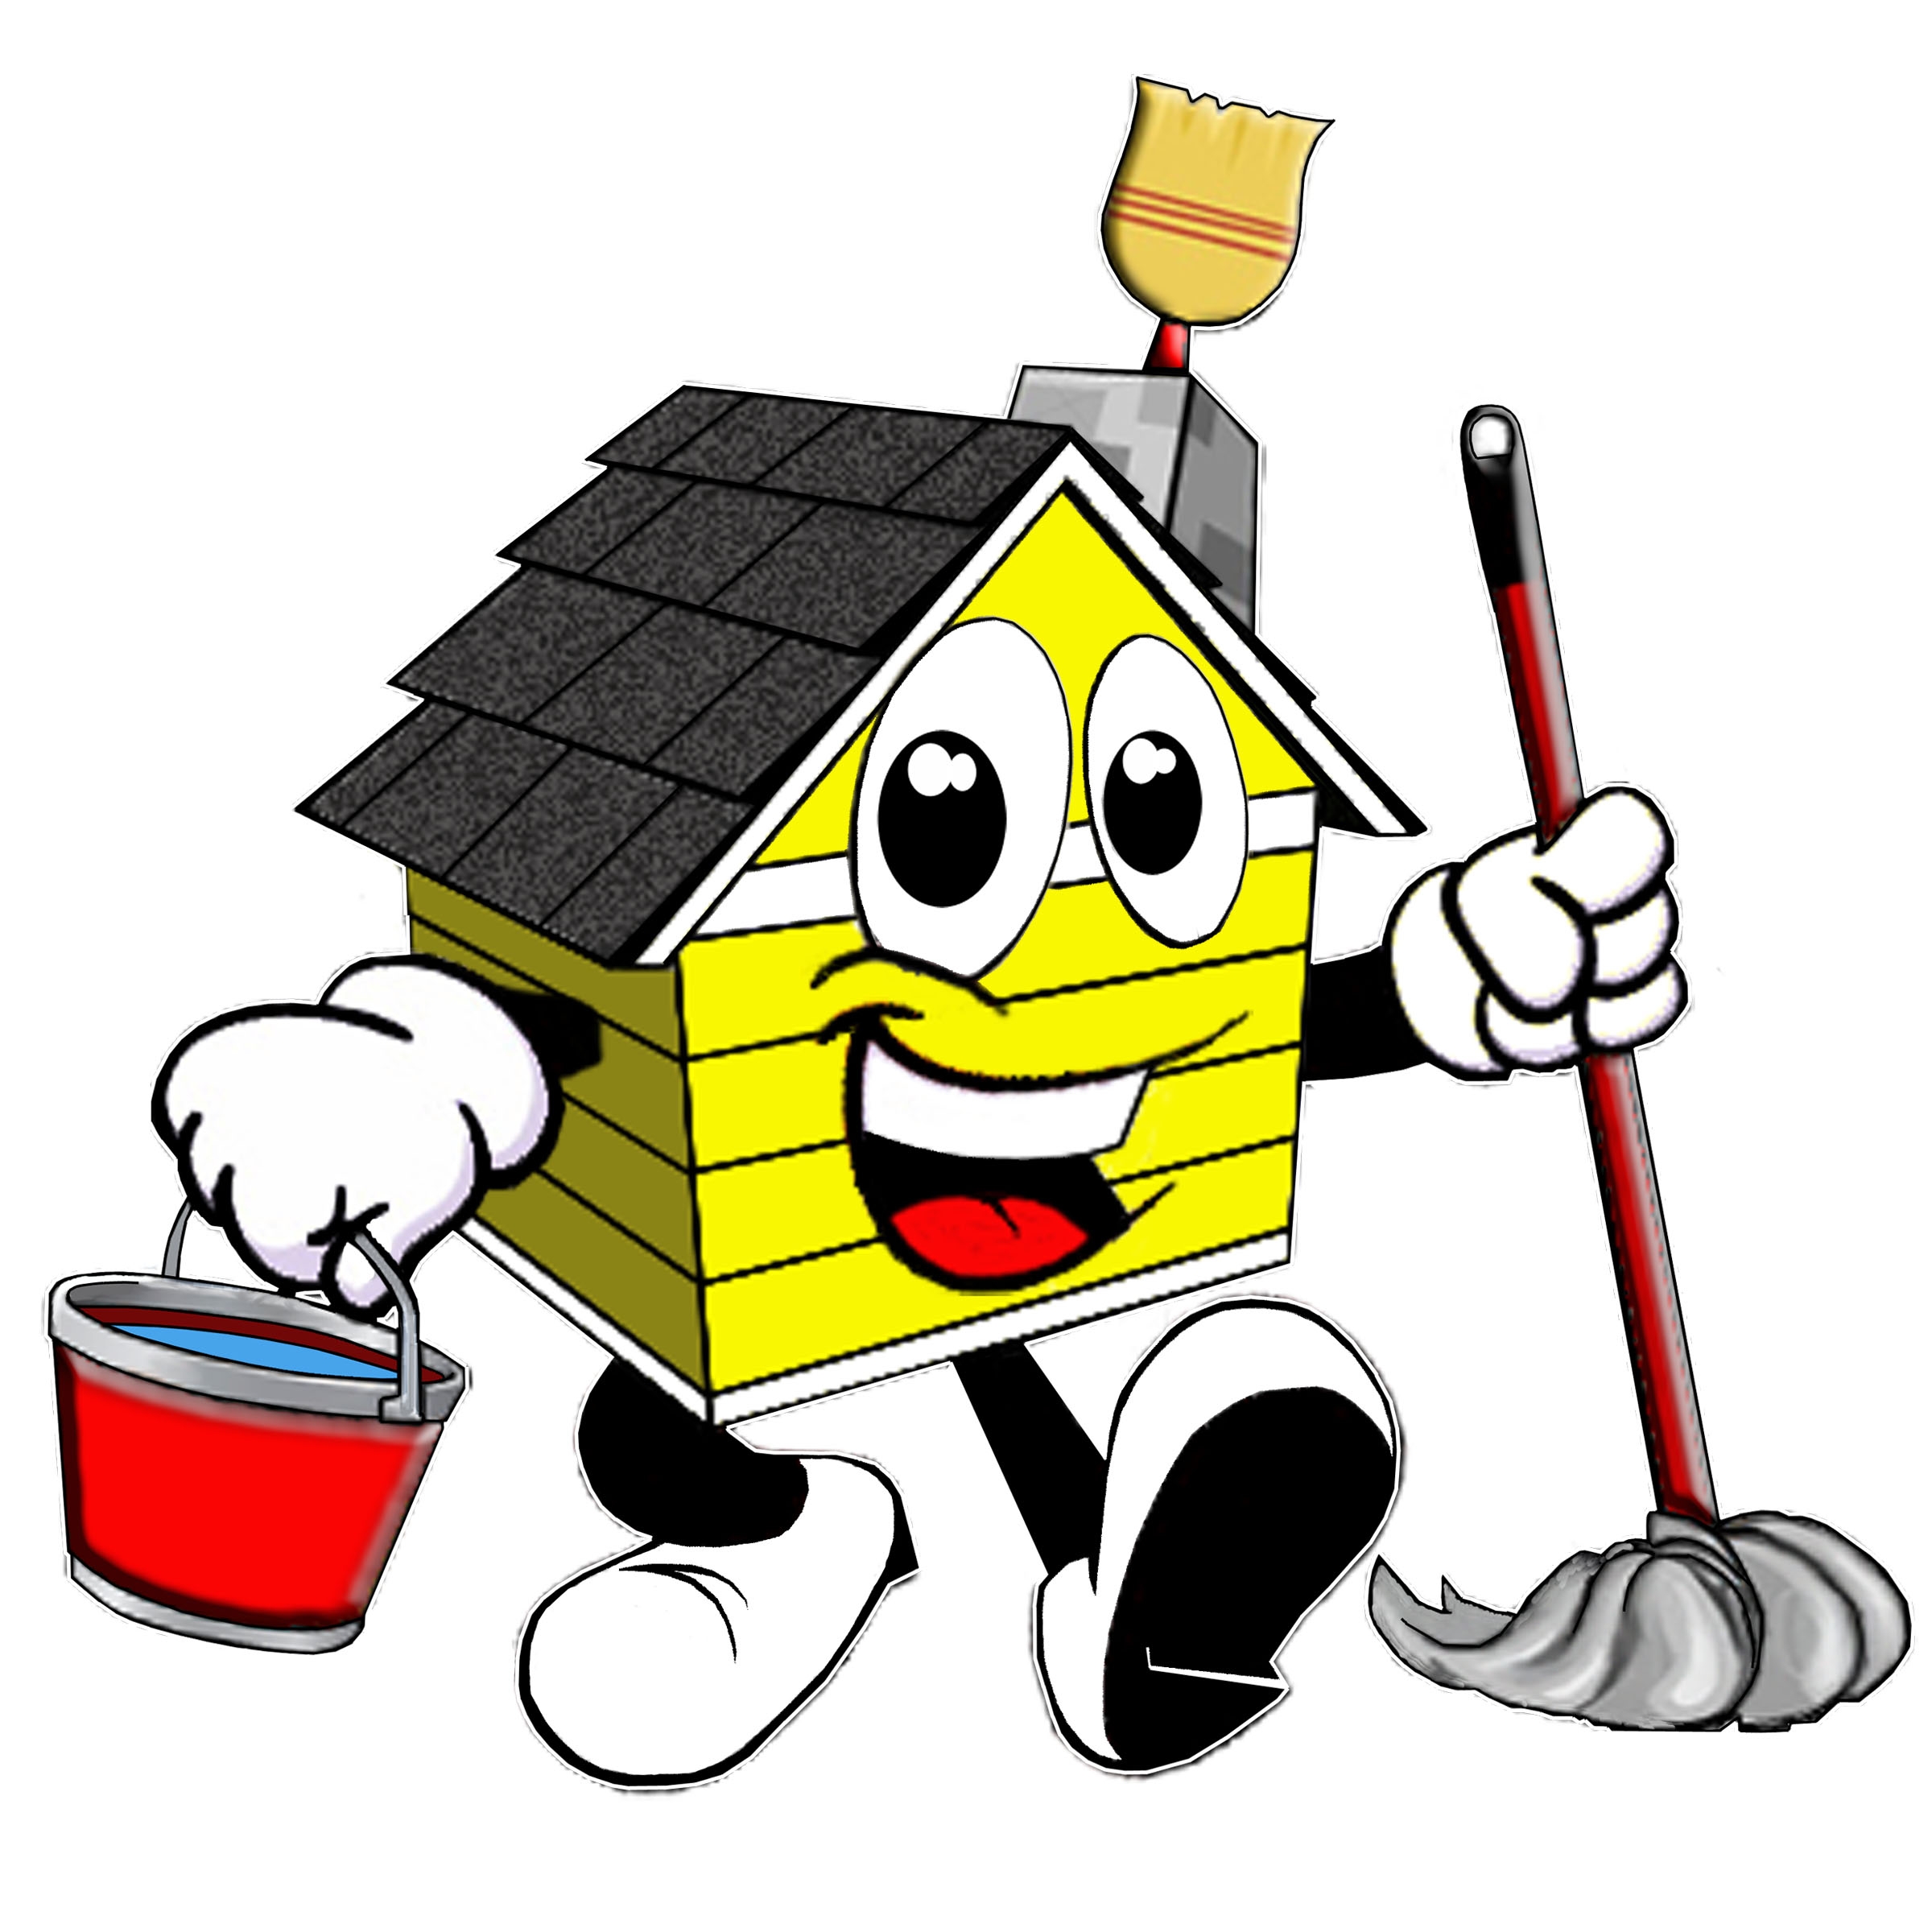 Cleaning supplies logo clipart